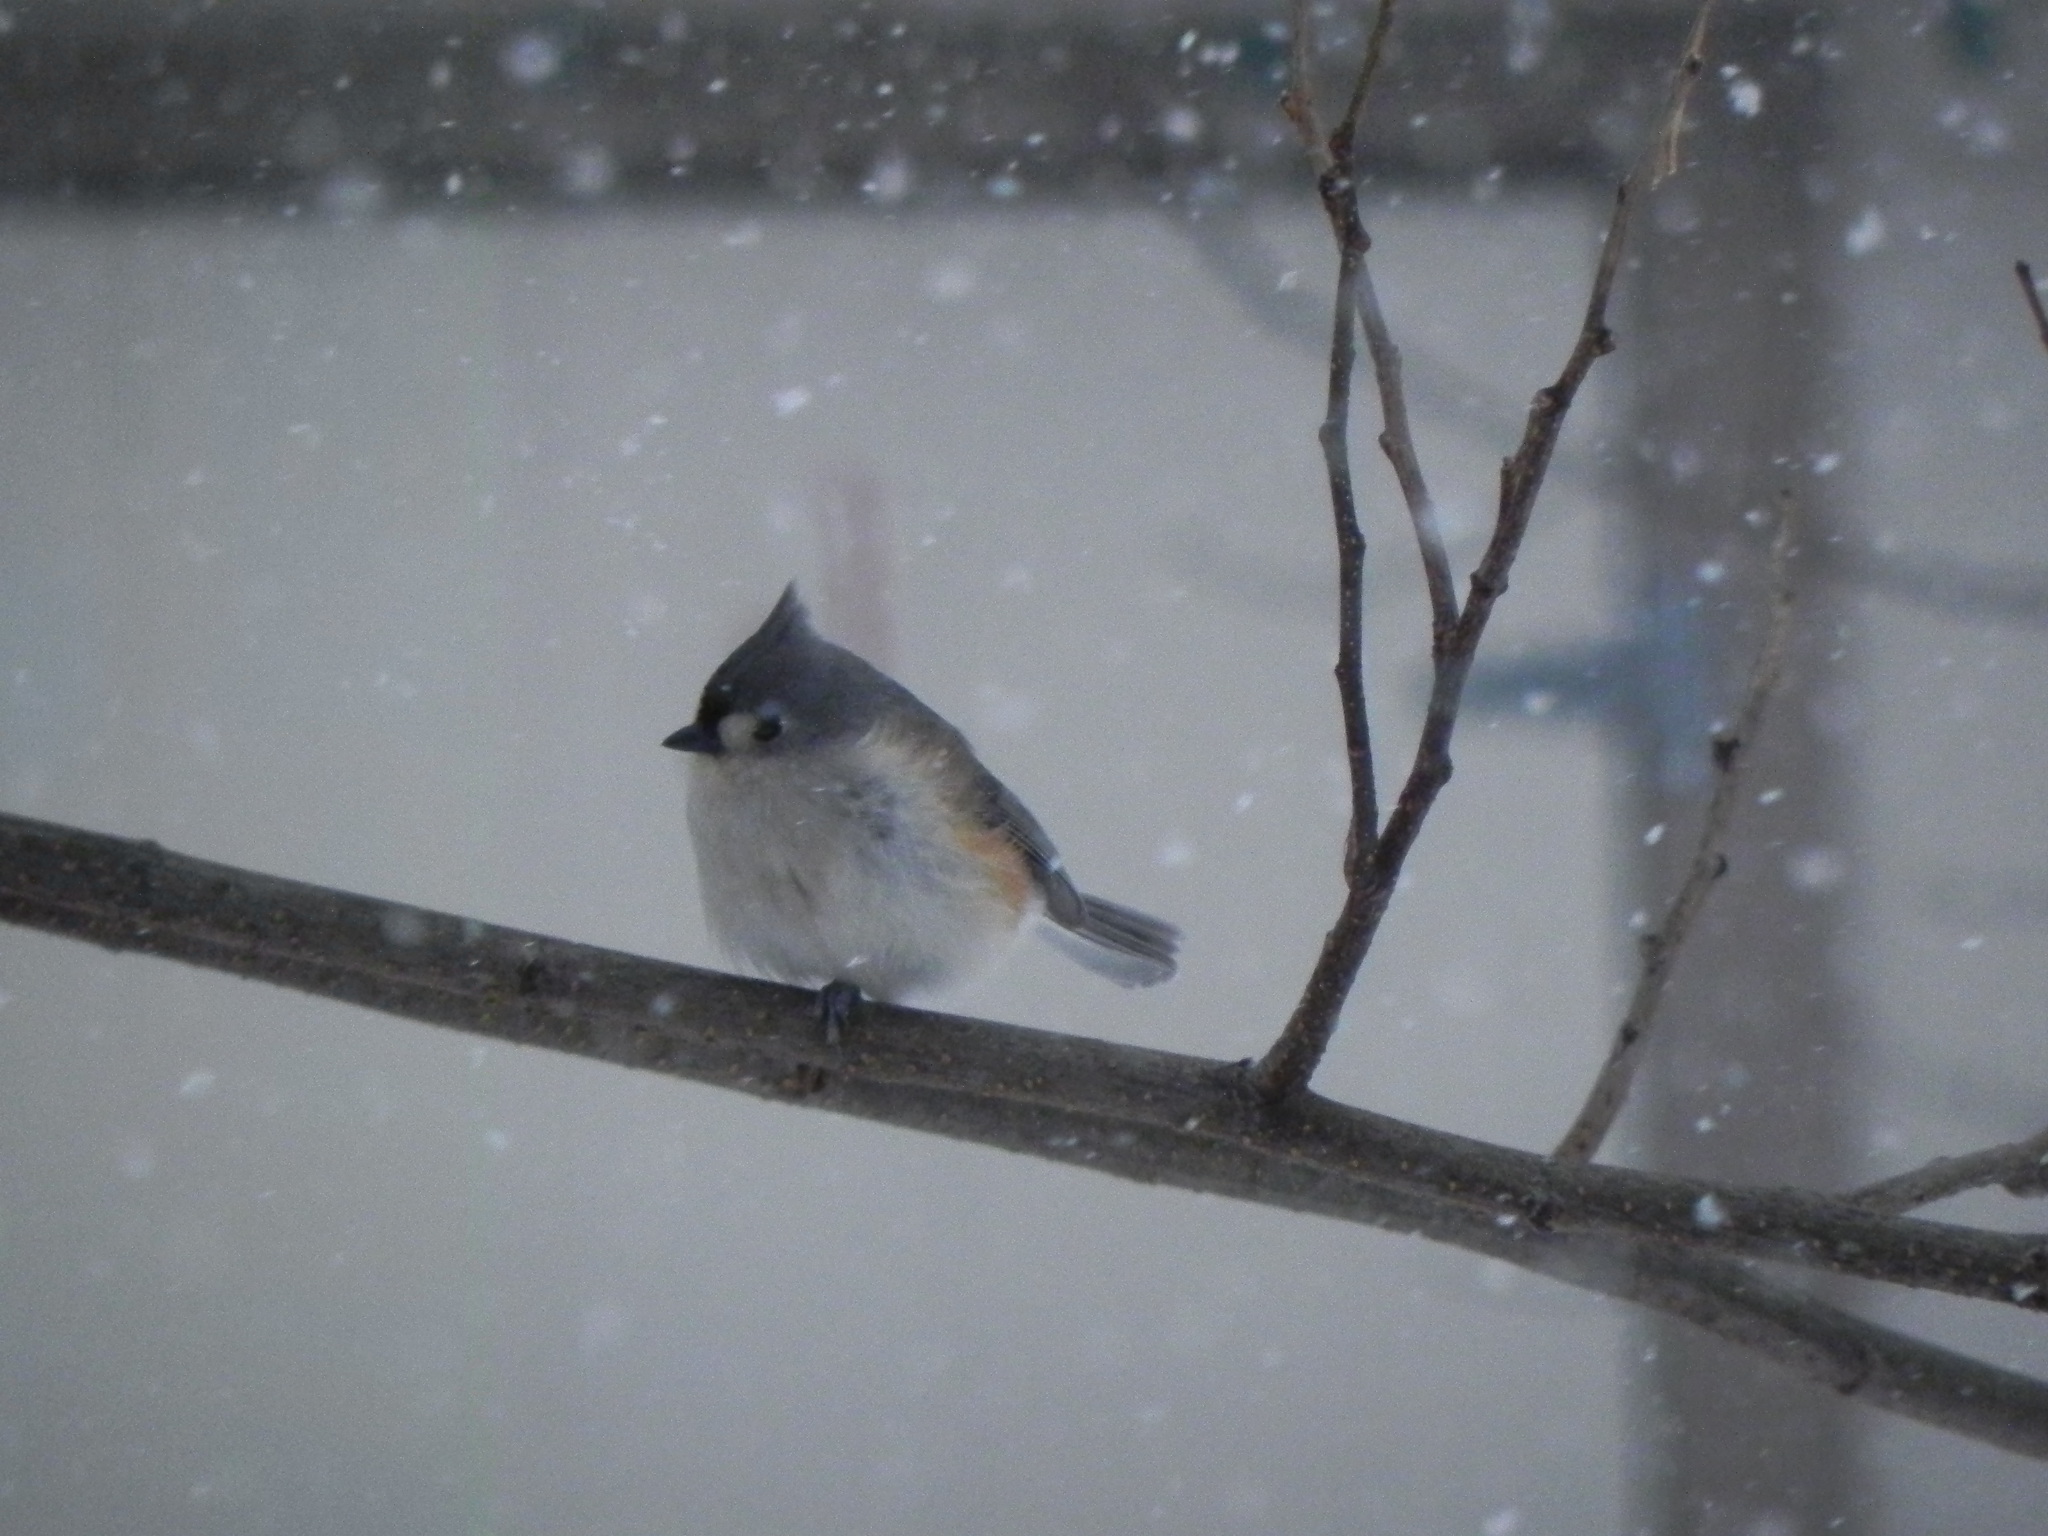 Bird Relaxing During Snowfall! (user submitted)